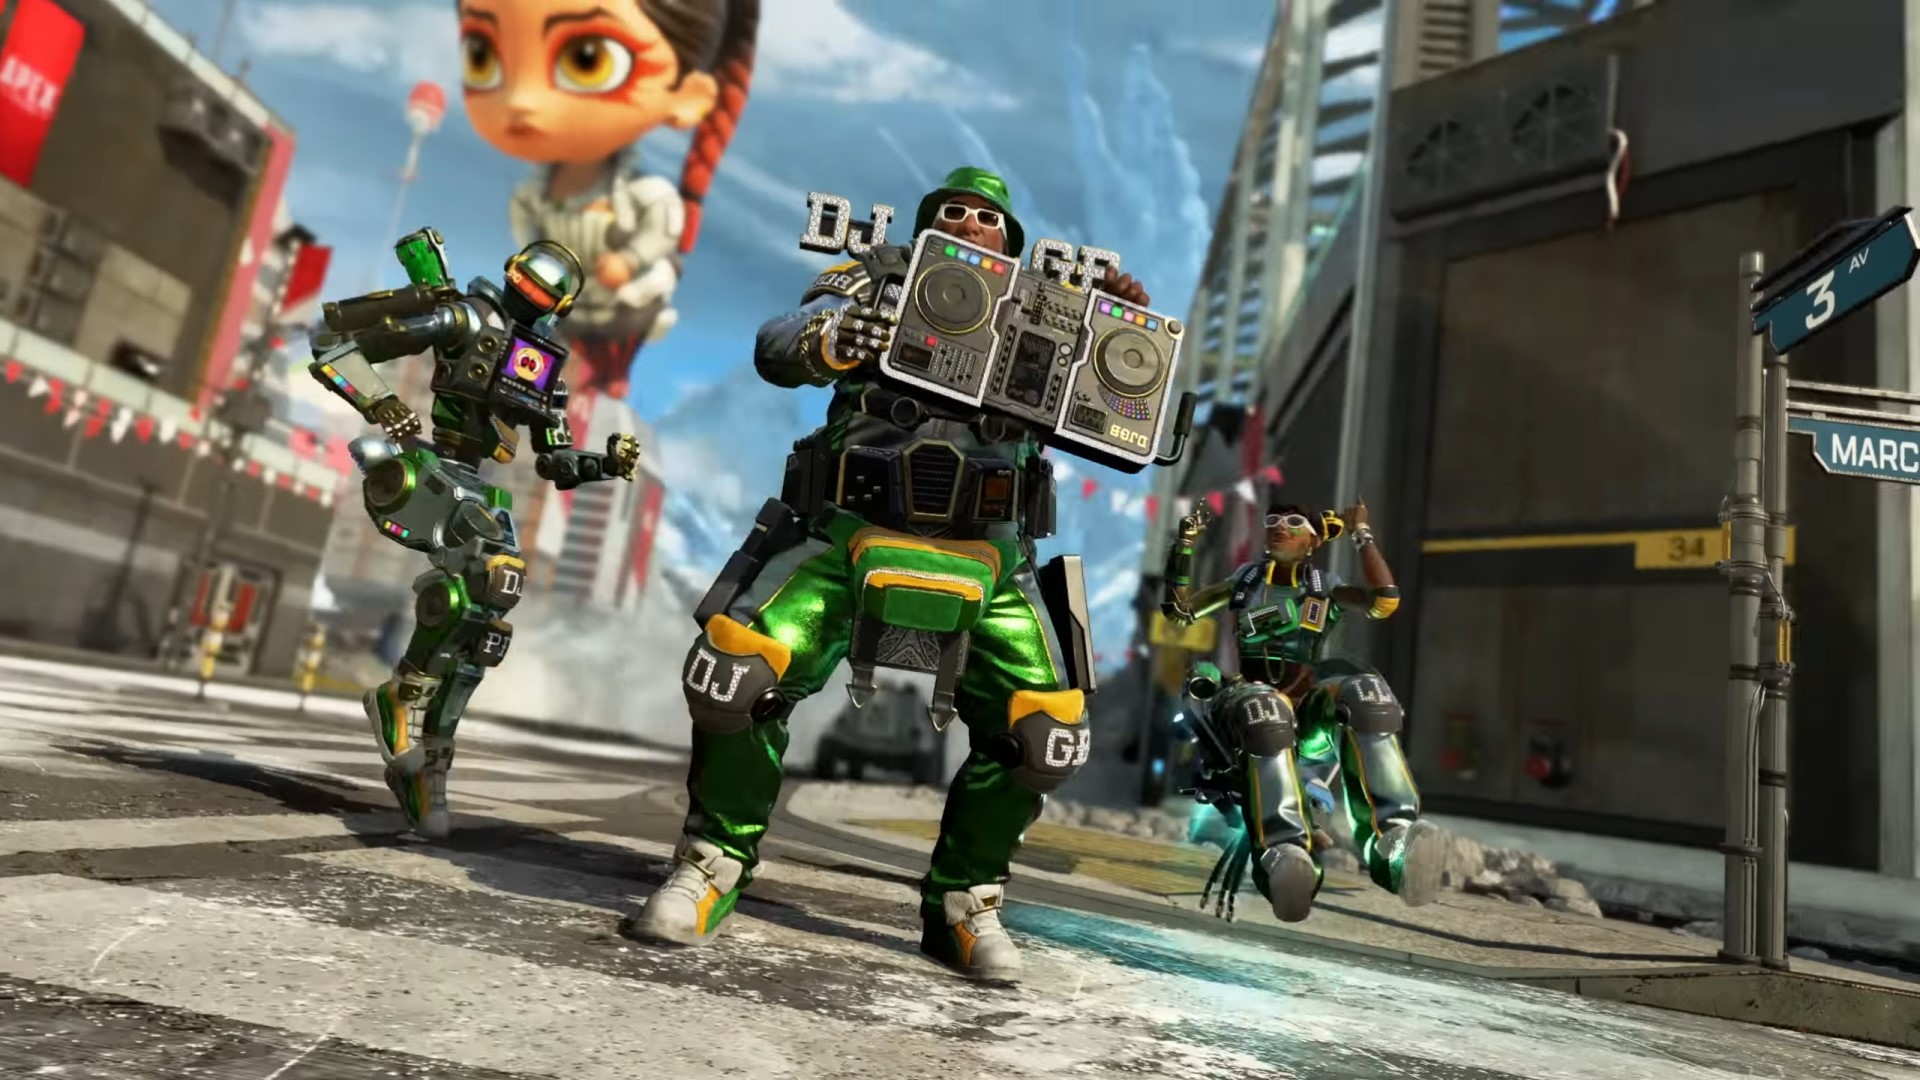 Apex Legends just saw its highest Steam player count ever